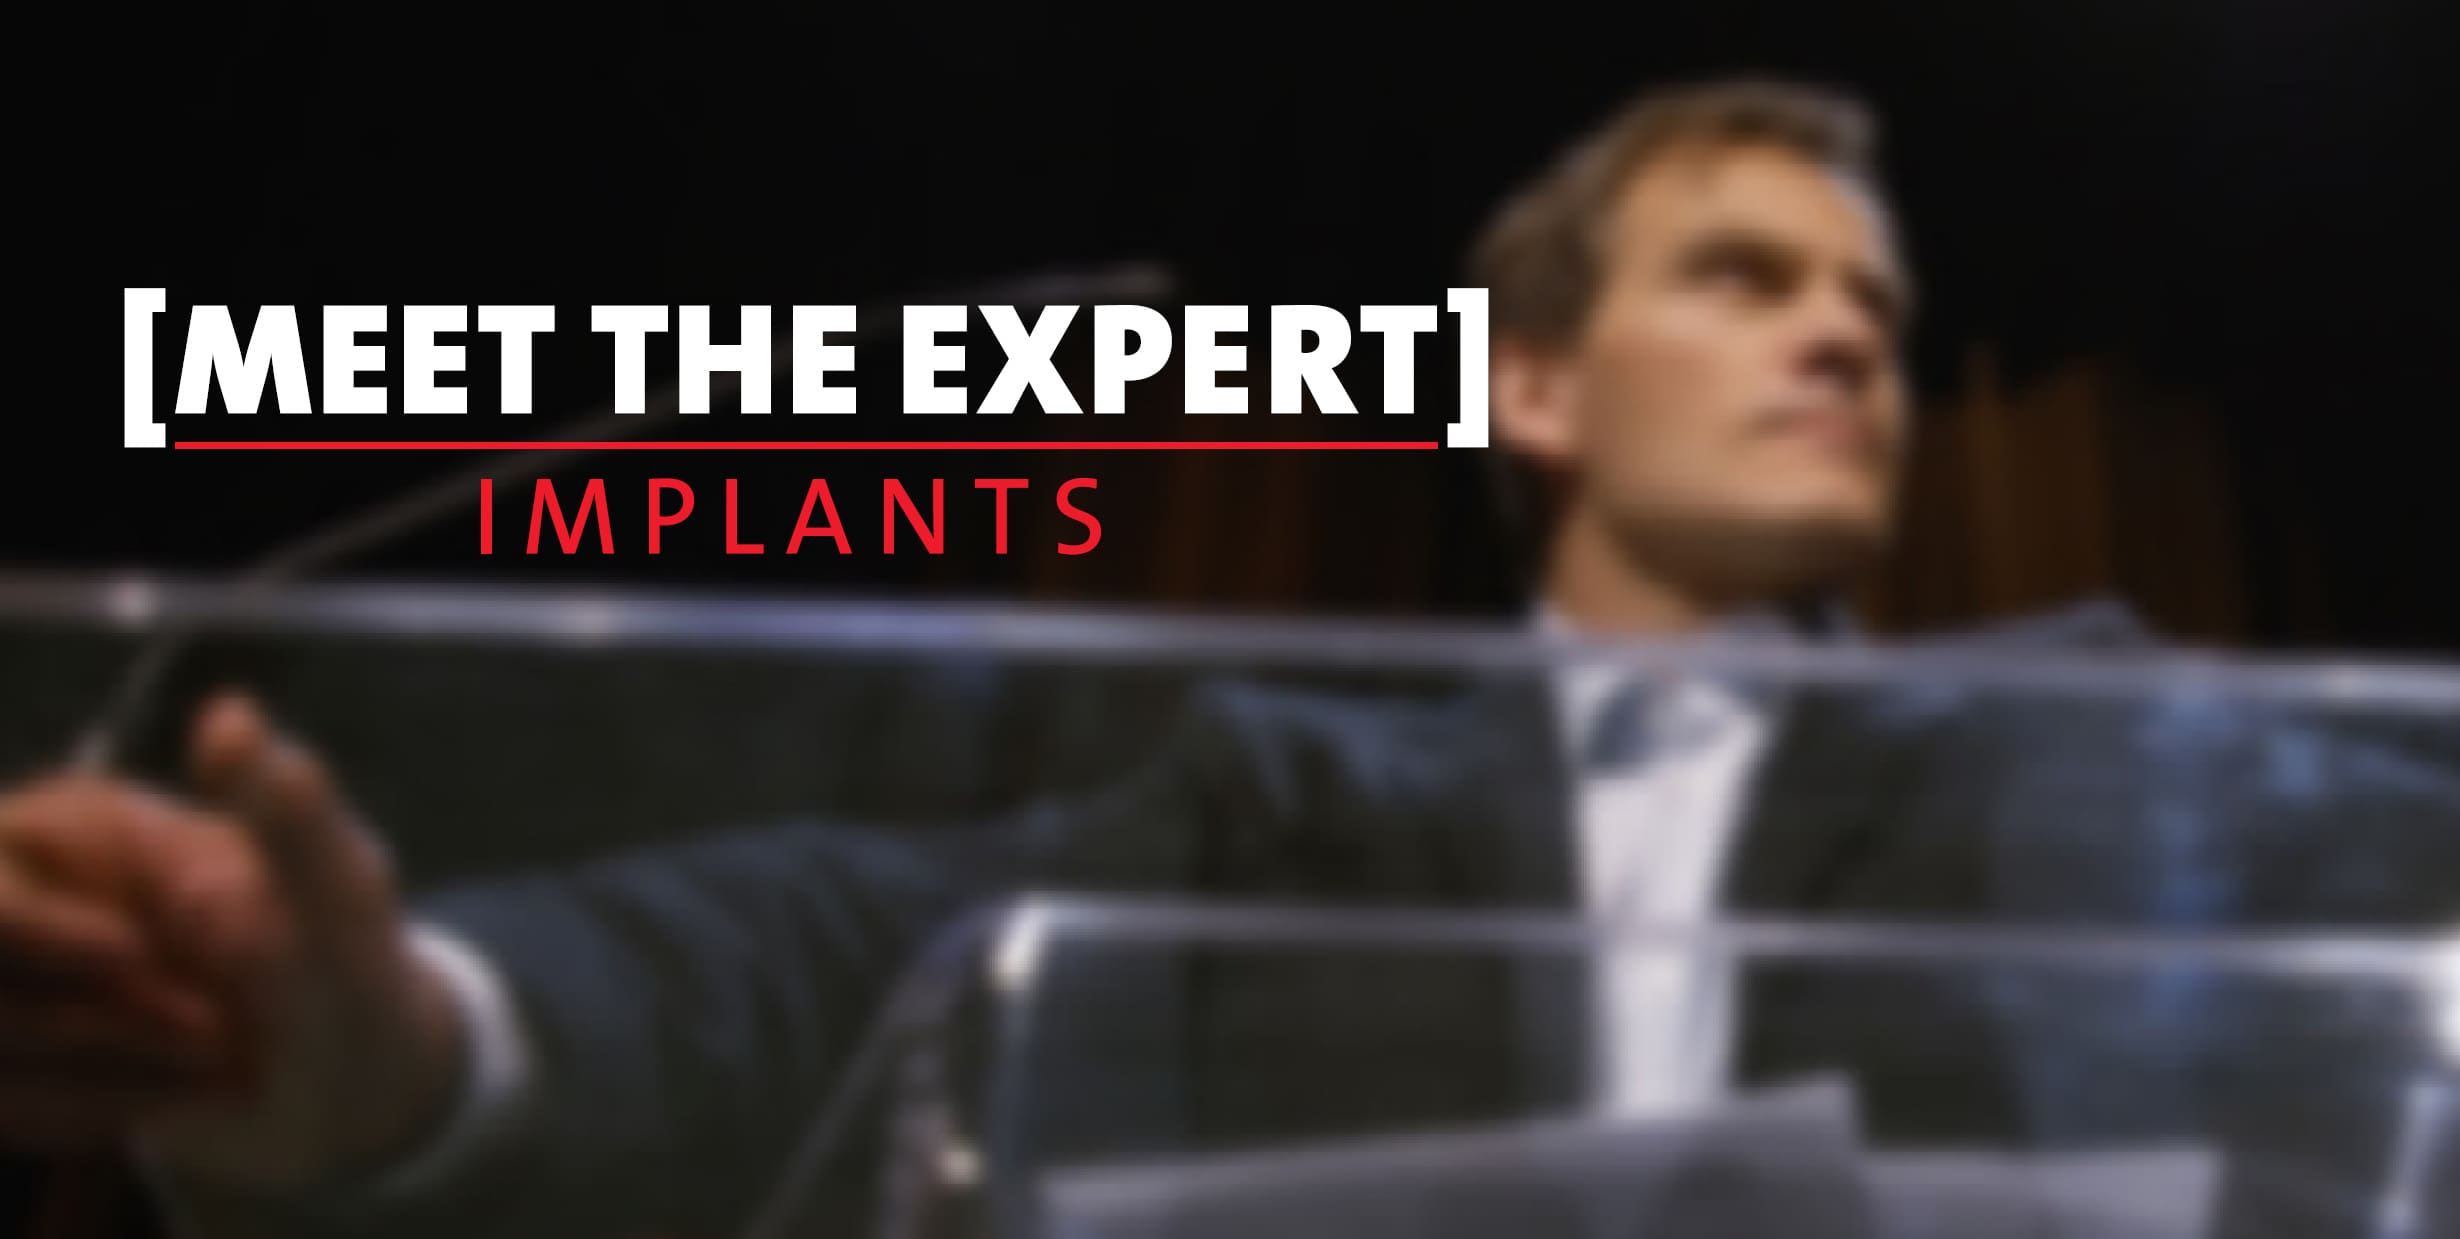 [MEET THE EXPERT] Implants Conference